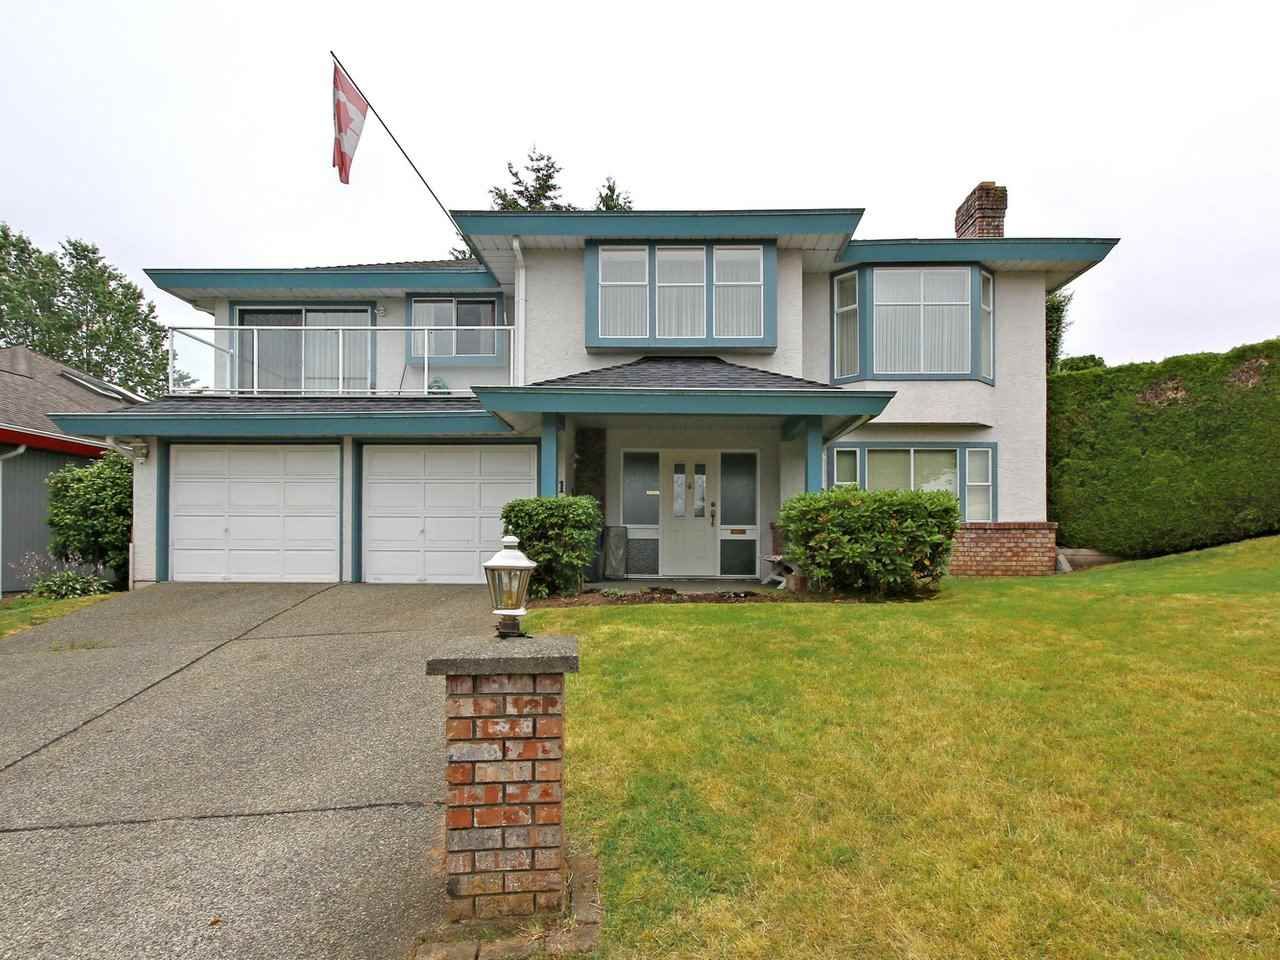 Photo 1: Photos: 601 CLEARWATER Way in Coquitlam: Coquitlam East House for sale : MLS®# R2383700